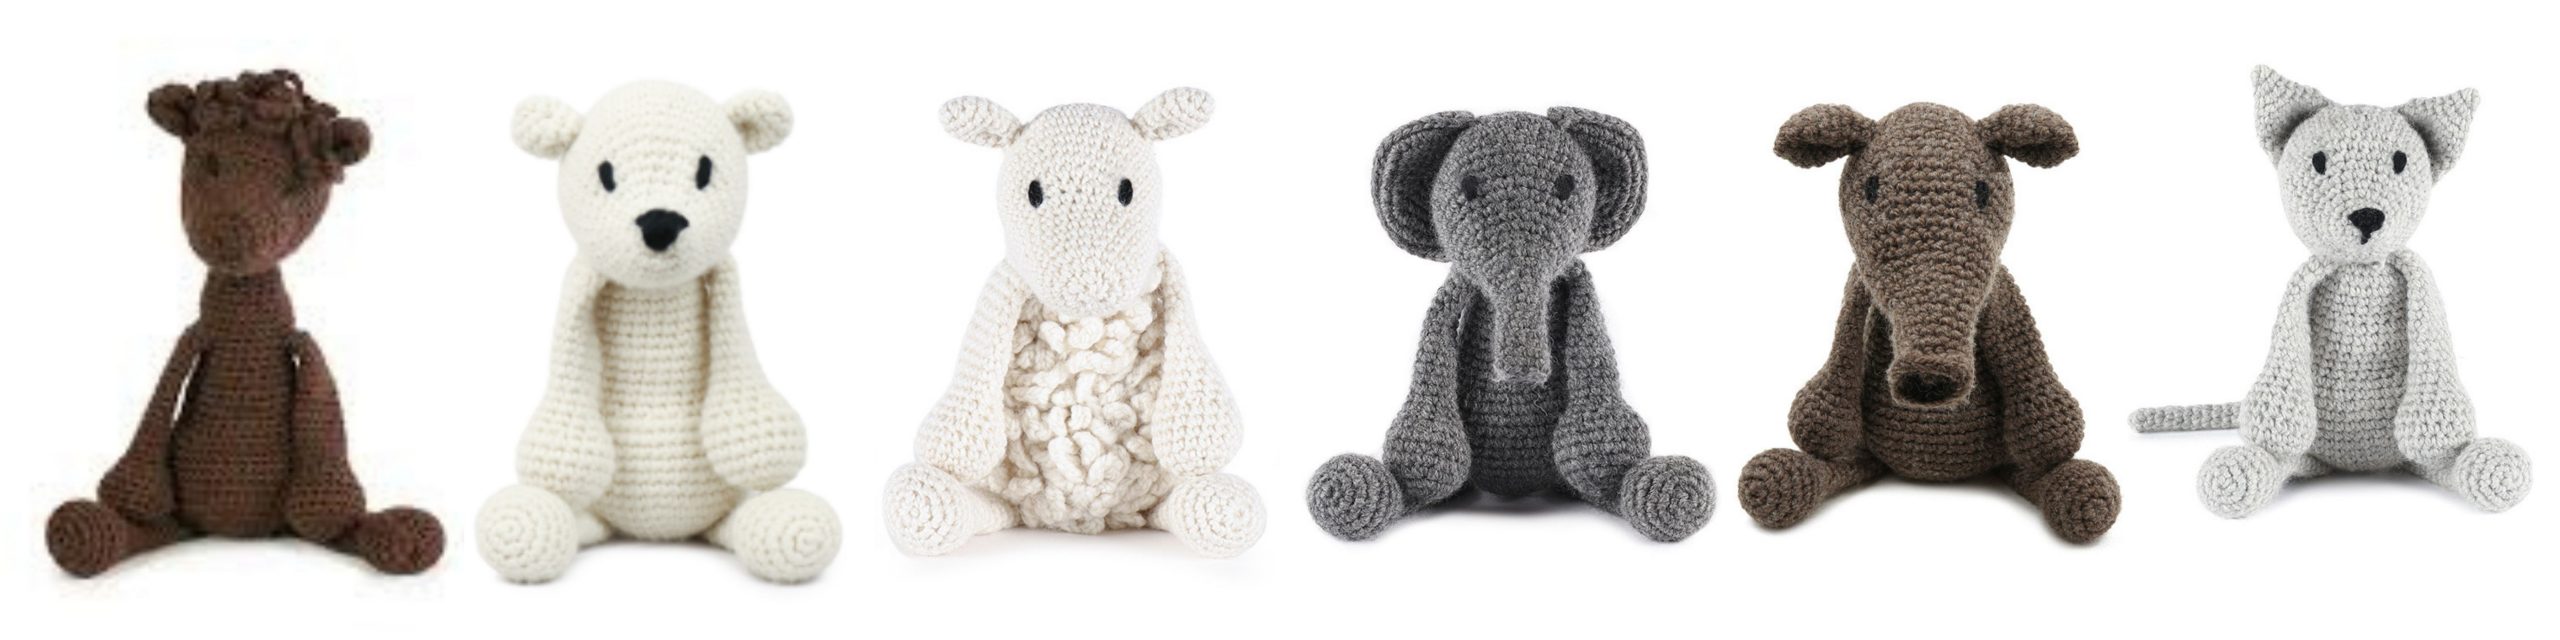 Six different crochet animal toys in a row, made from our crochet animal kits